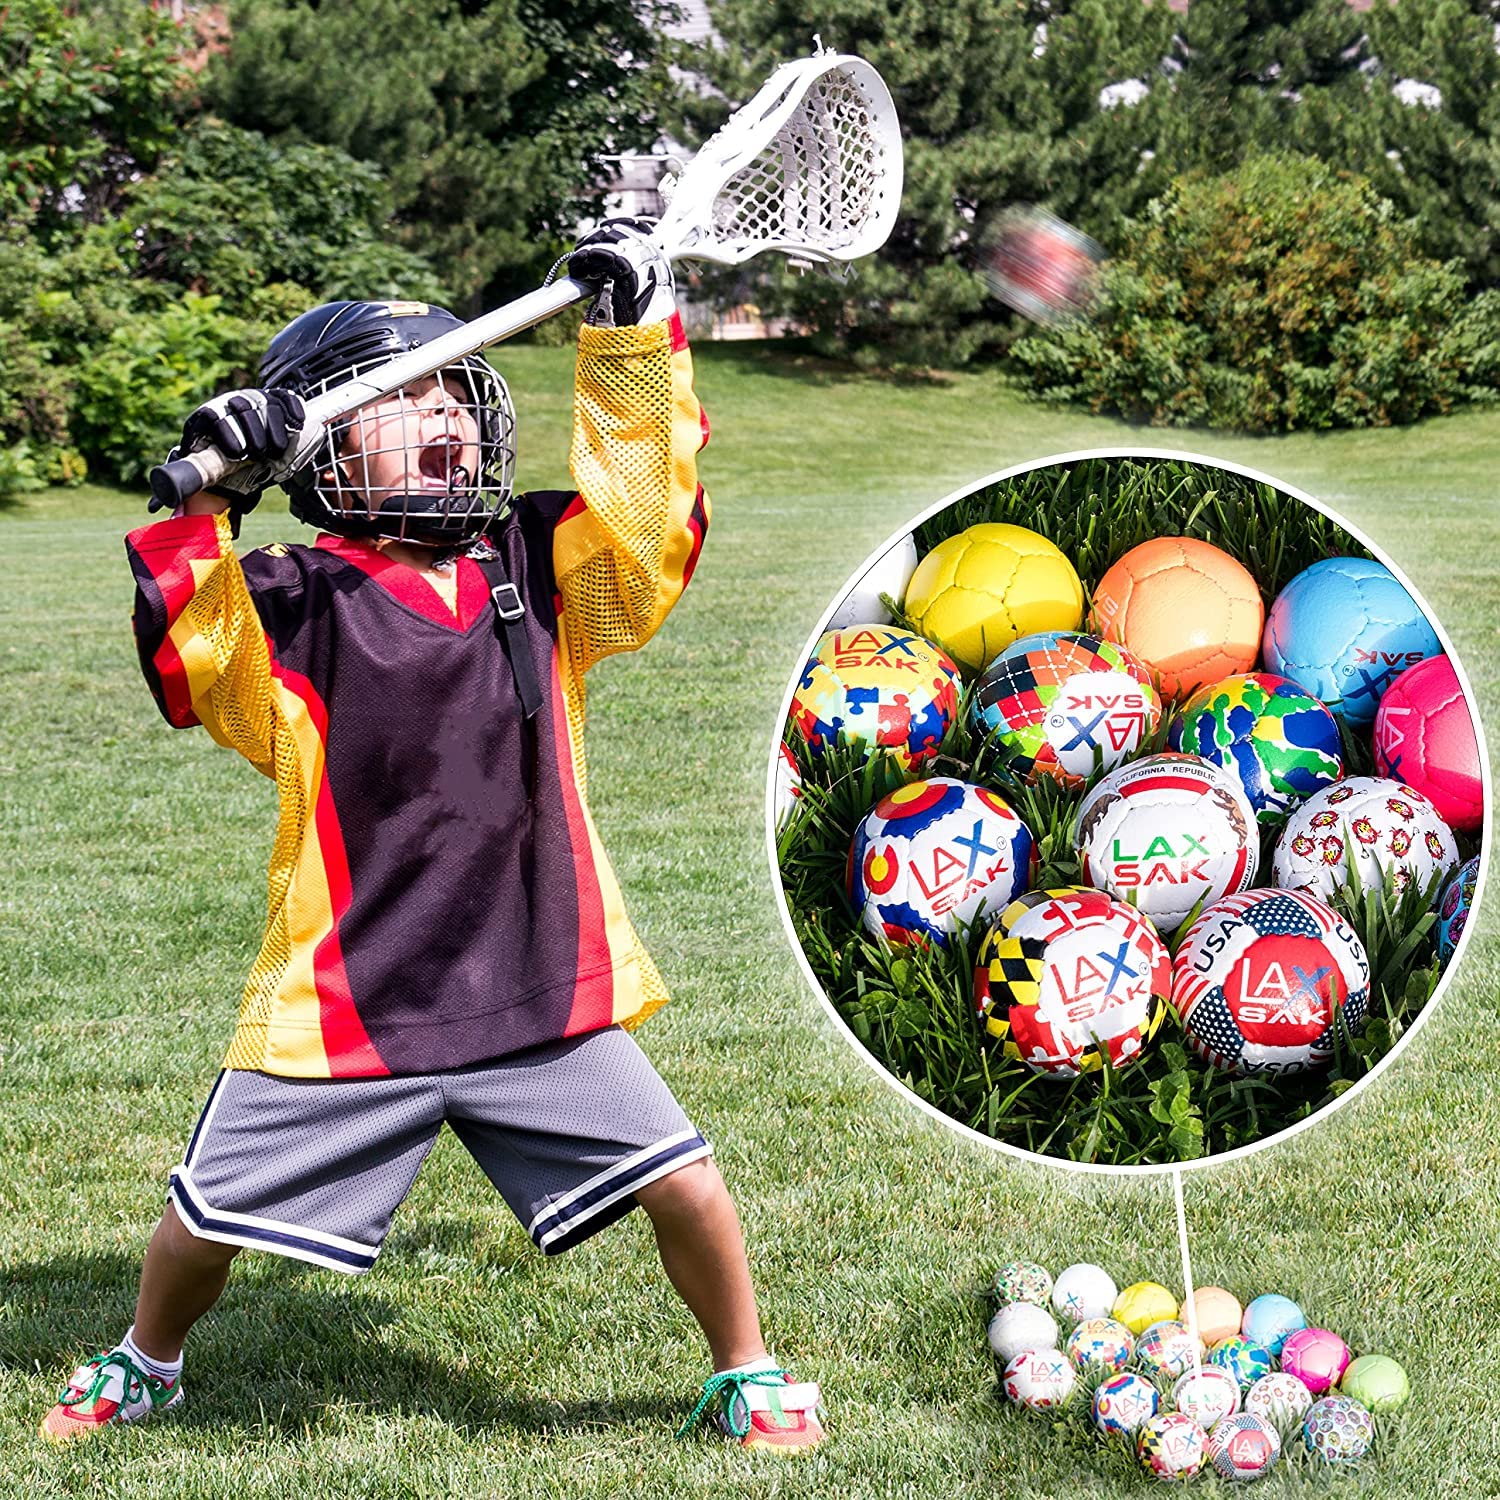 Lax Sak Soft Practice Lacrosse Balls - Same Weight & Size as a Regulation Lacrosse Balls, Great for Indoor & Outdoor Practices, 